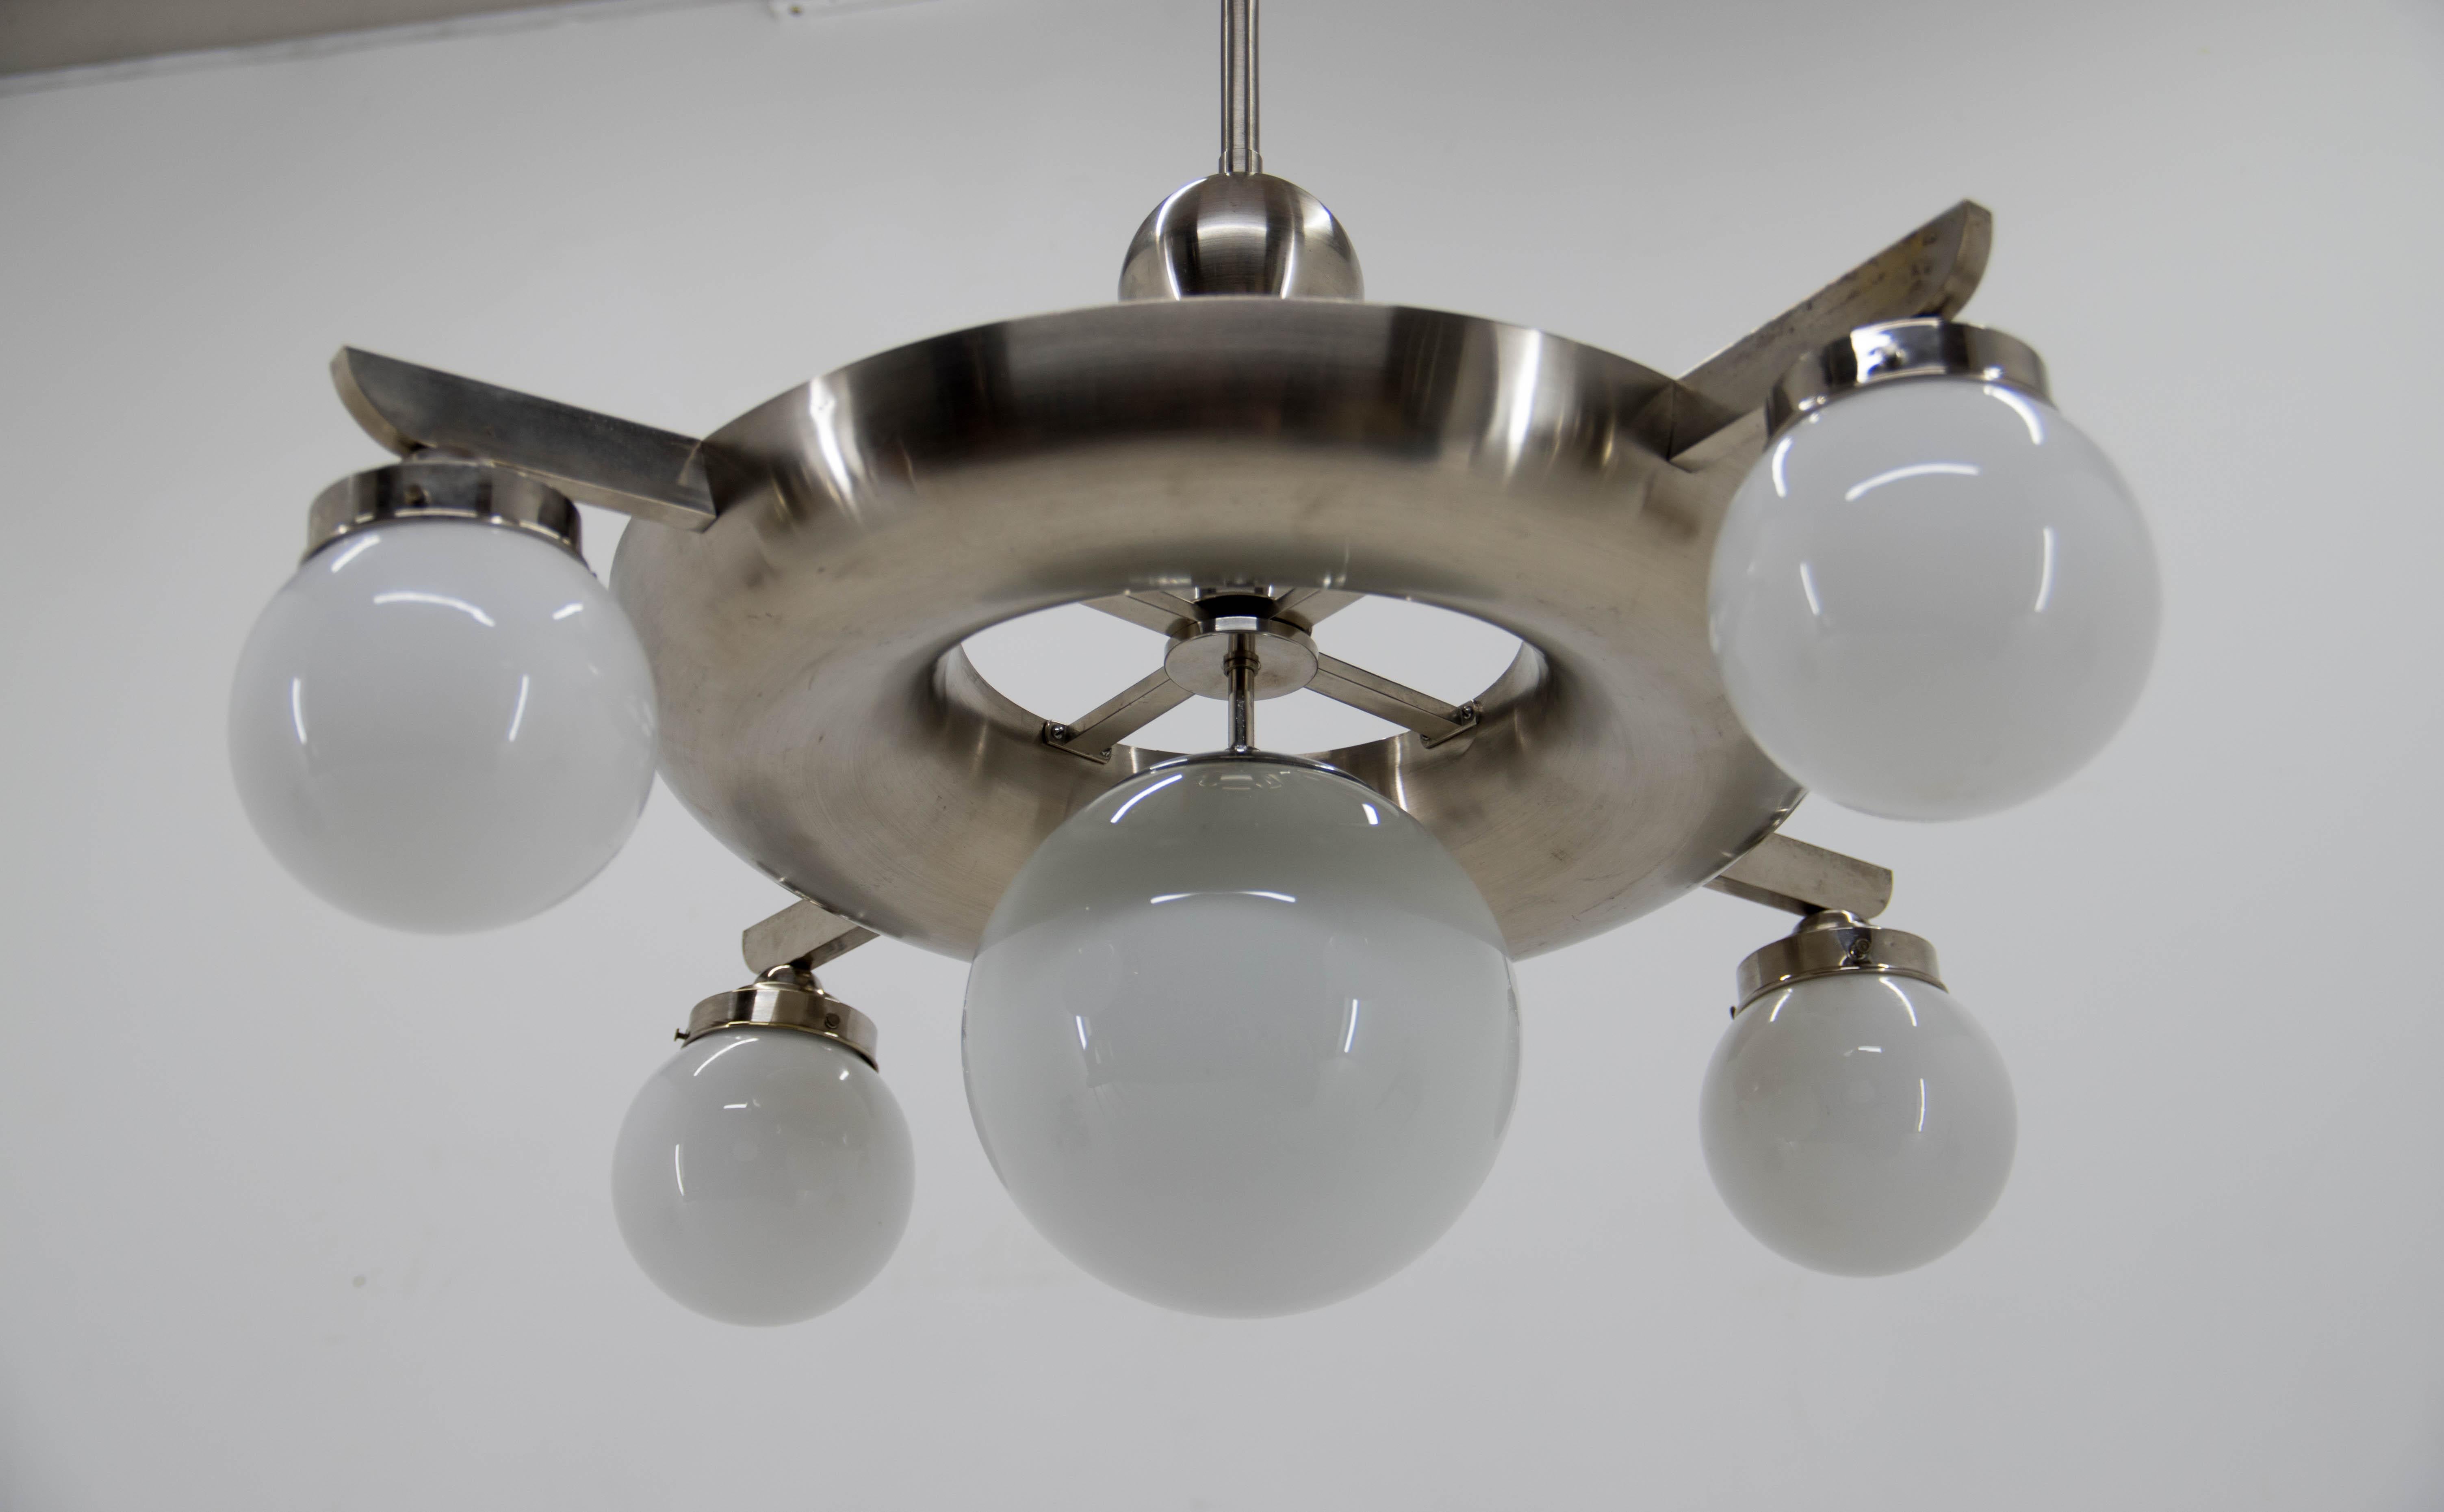 Very rare large Bauhaus 9-flamming nickel-plated chandelier designed by Franta Anyz and executed by IAS in late 1920s.
Rewired - three separate circuits allow for many different lighting options.
 4+4+1 E25-E27 bulbs, 9x40W, US wiring